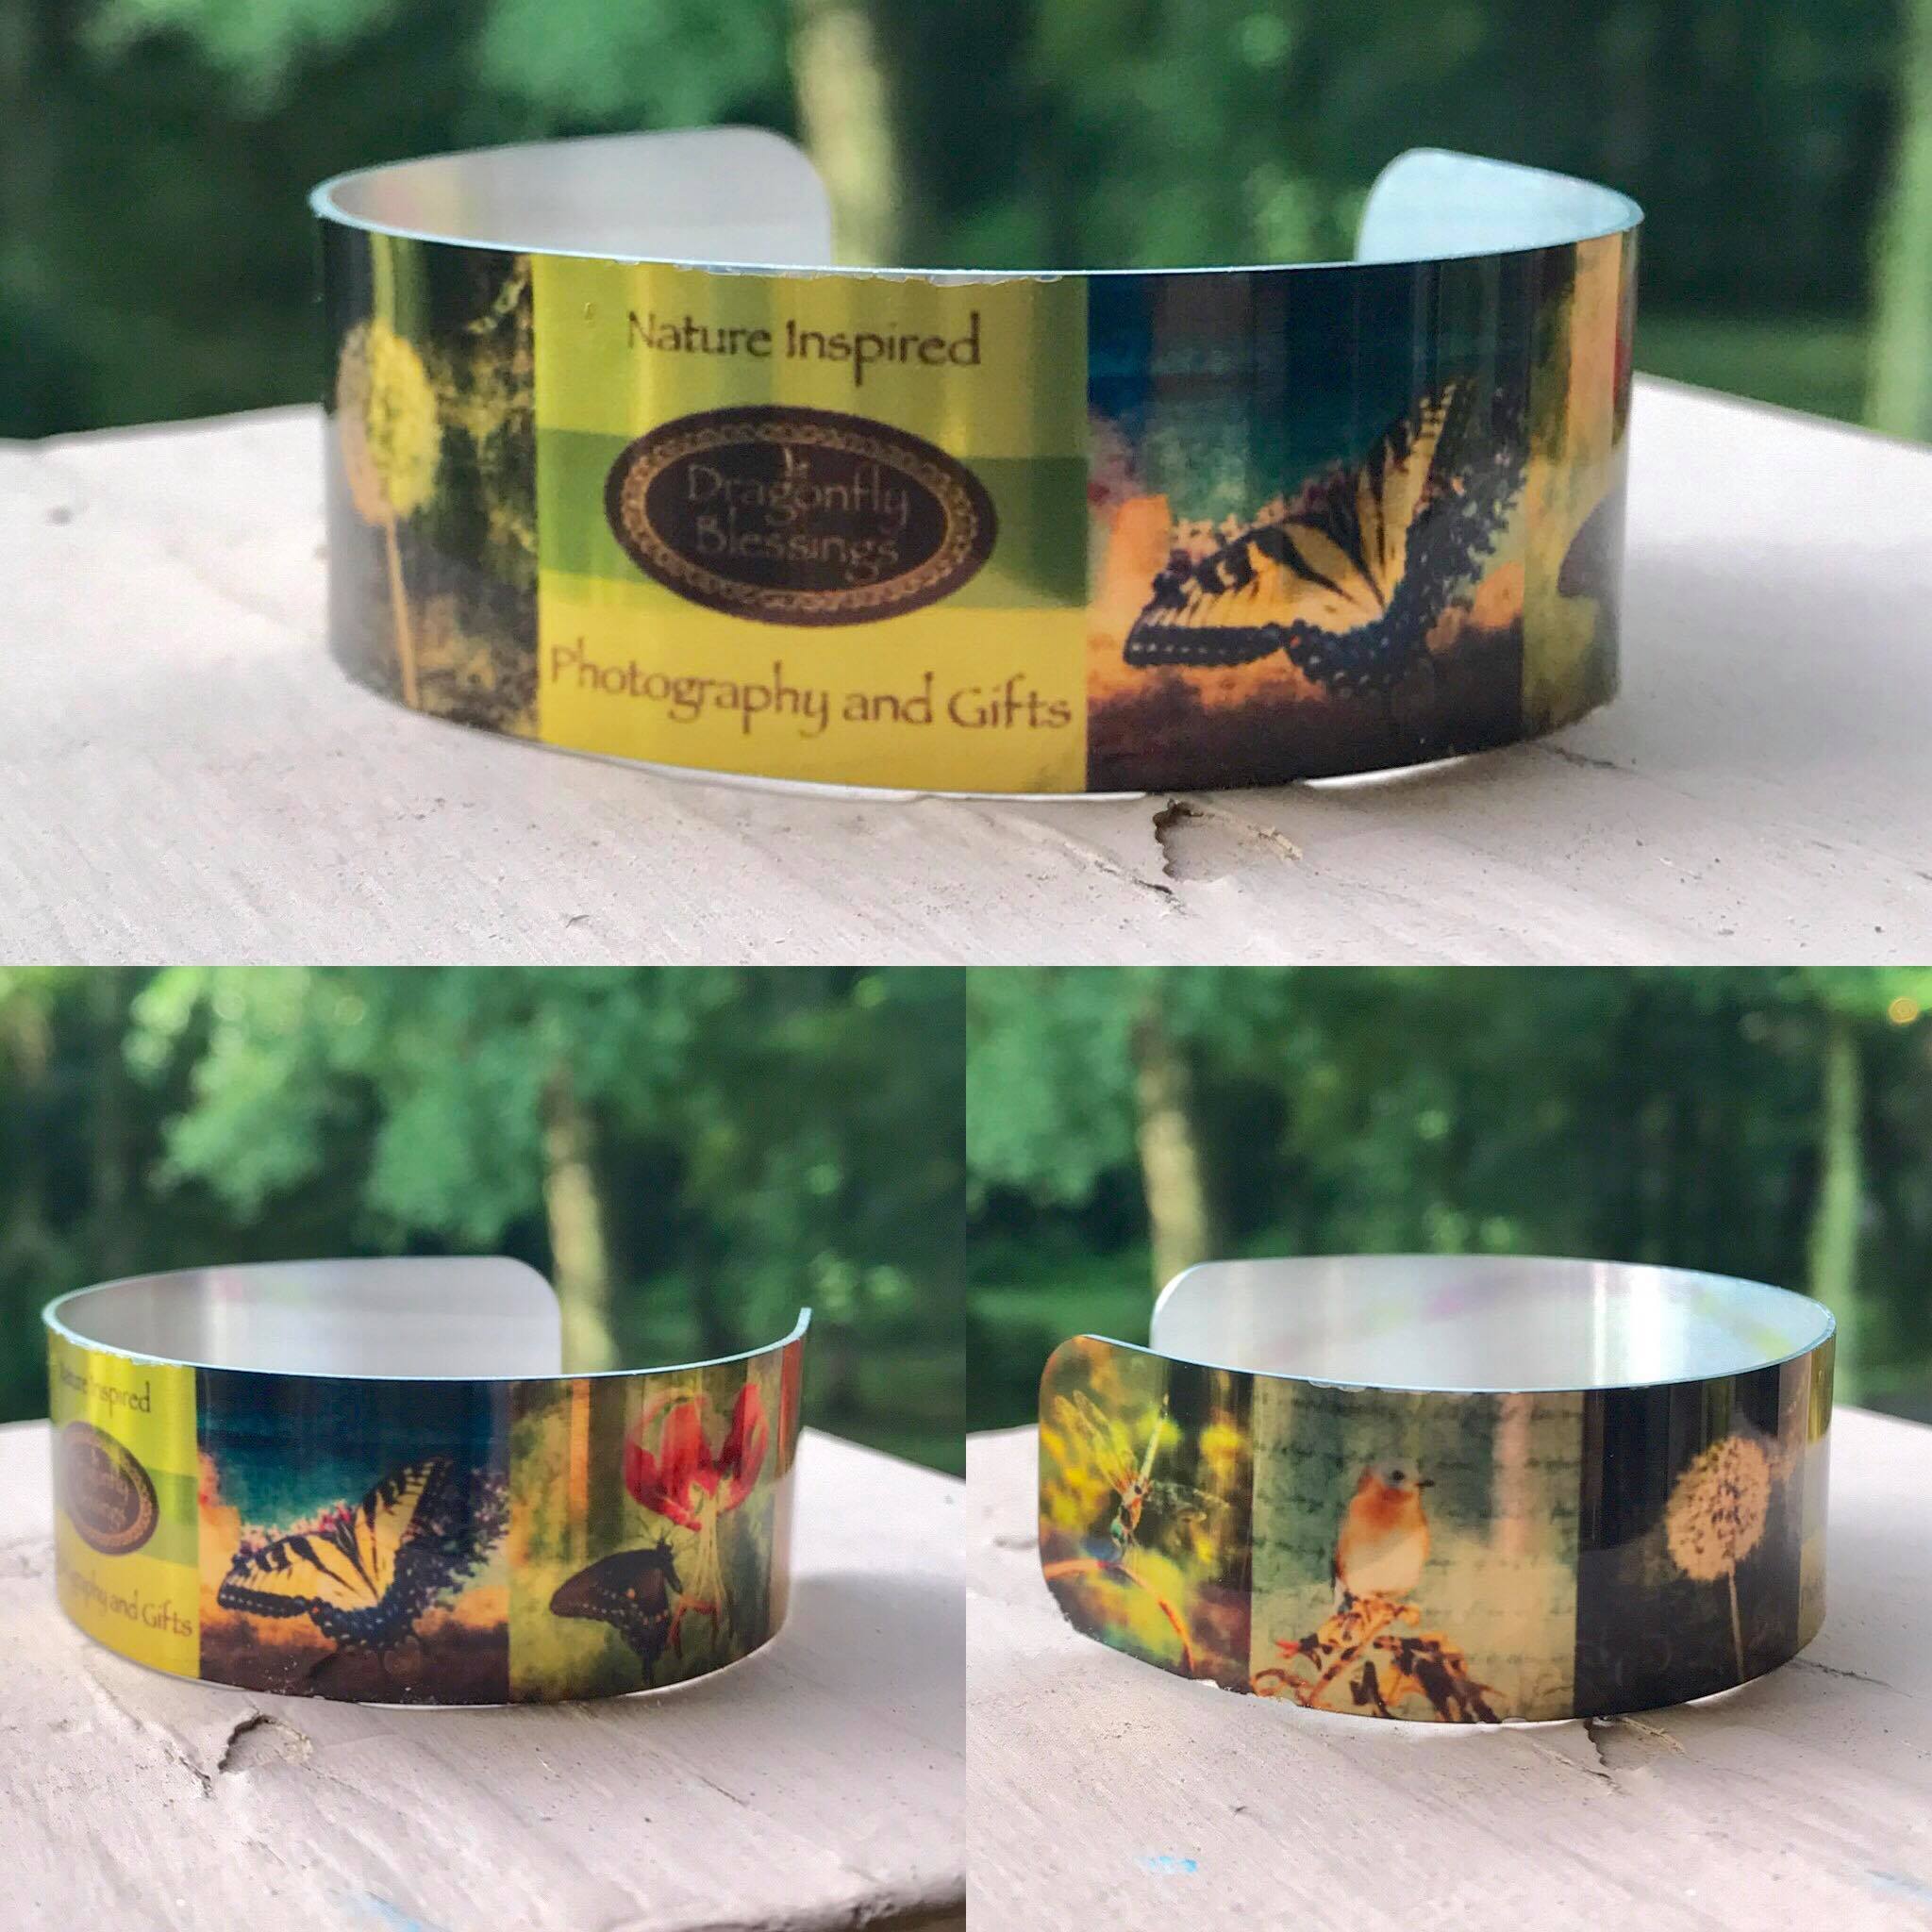 Dragonfly Blessings made with sublimation printing